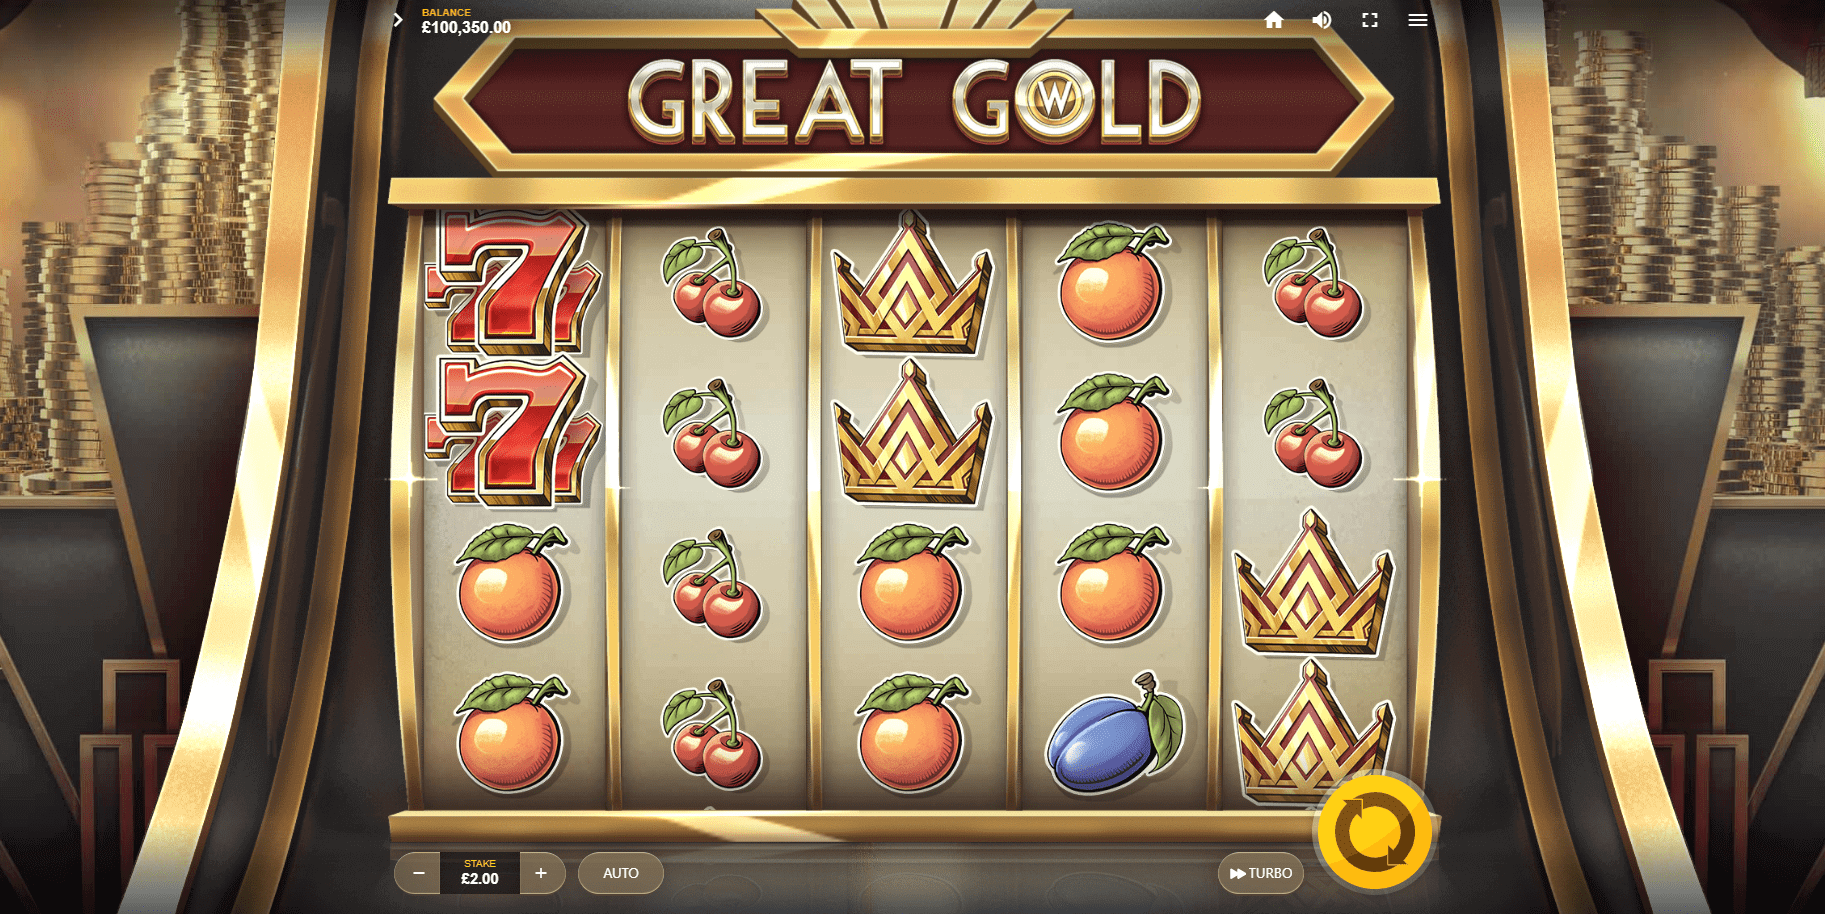 Great Gold slot